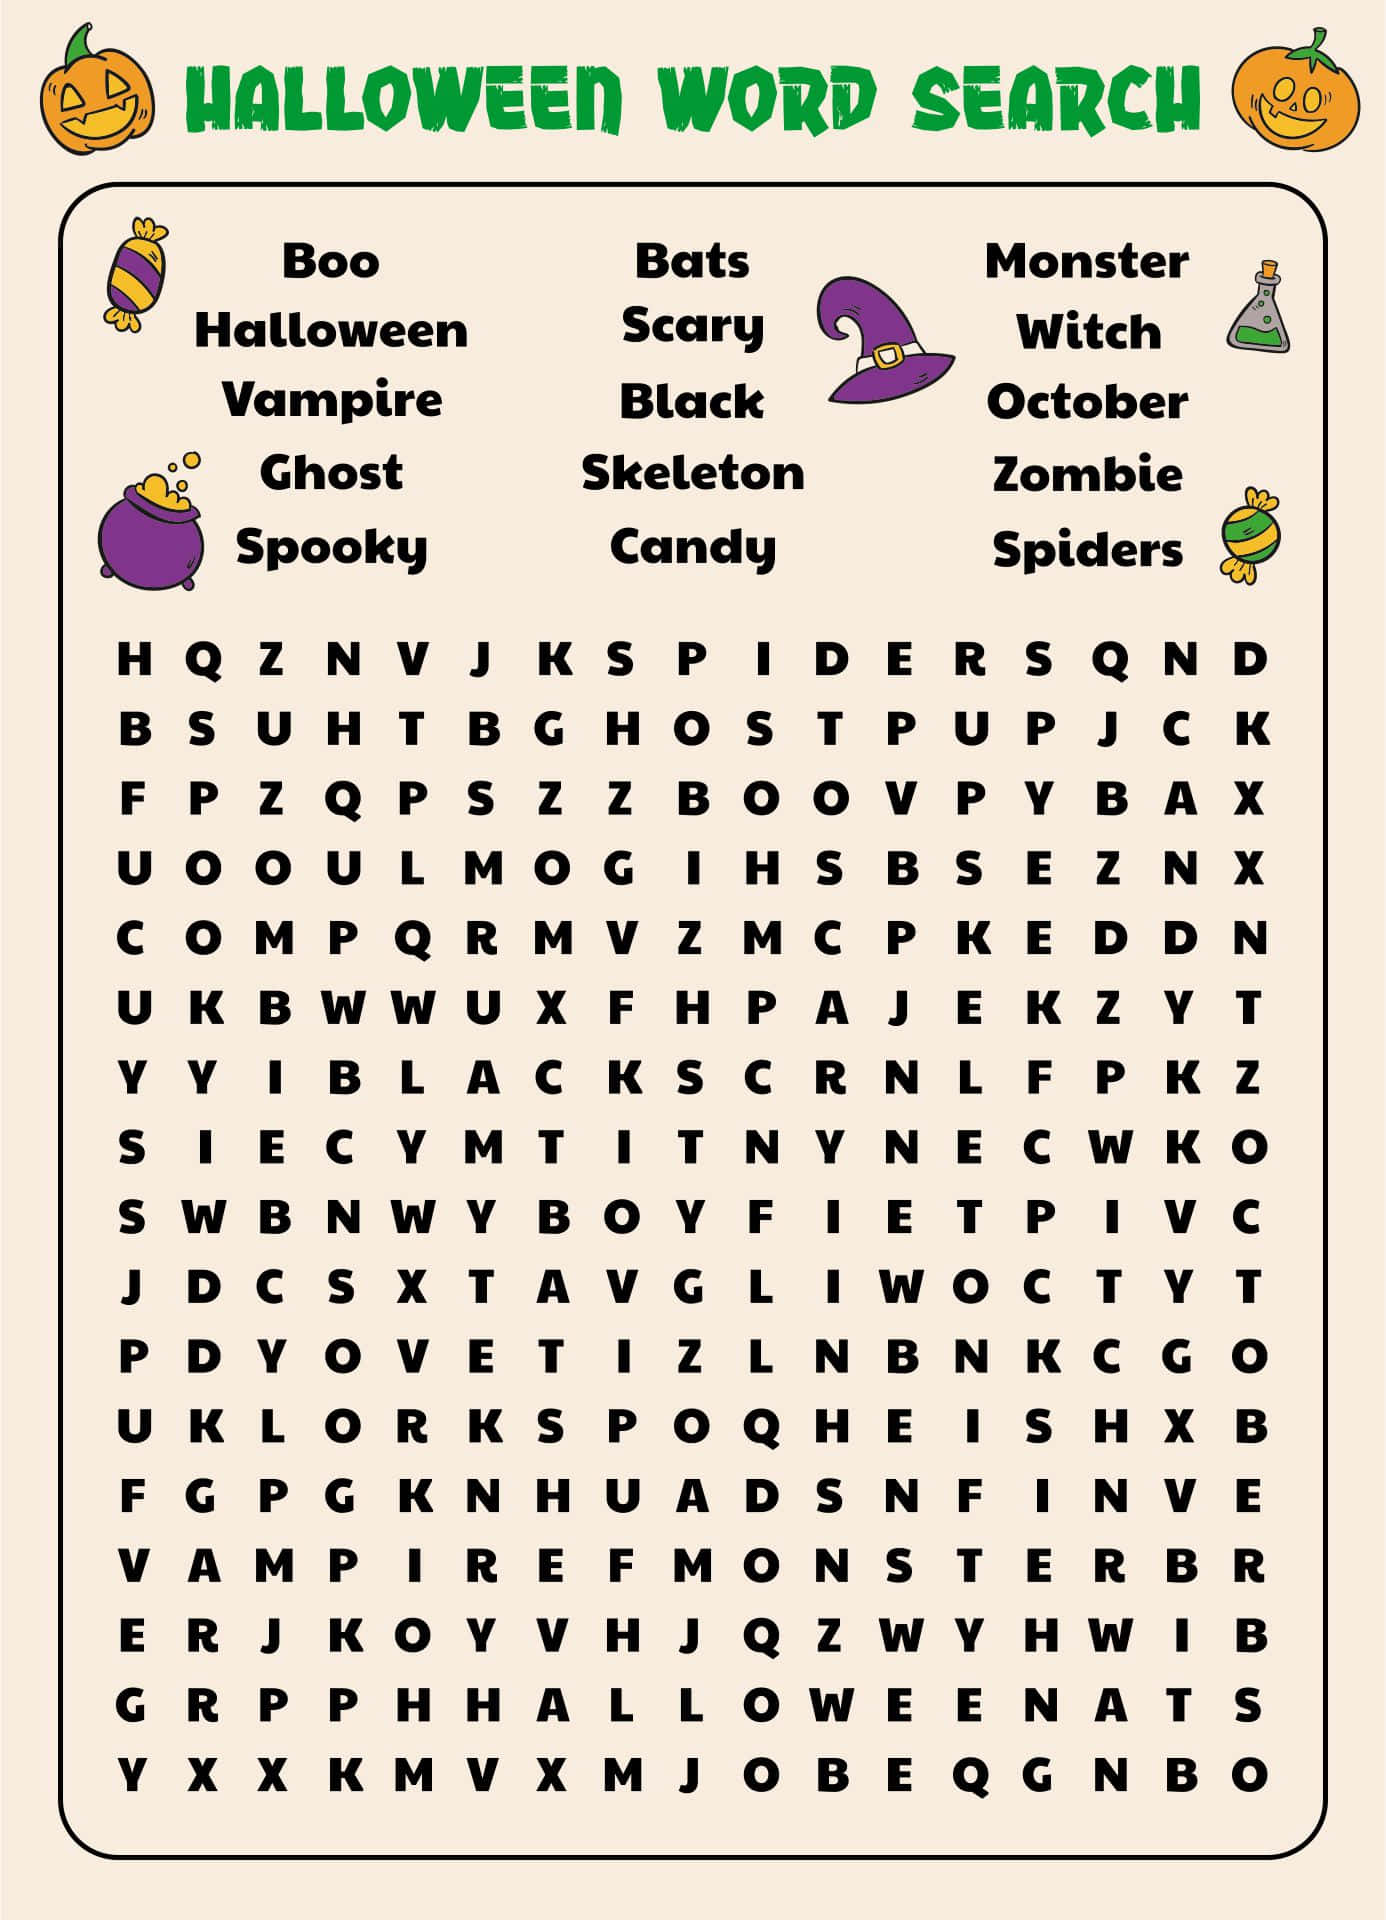 Test your knowledge with an eerie Halloween-themed puzzle this October! Wallpaper